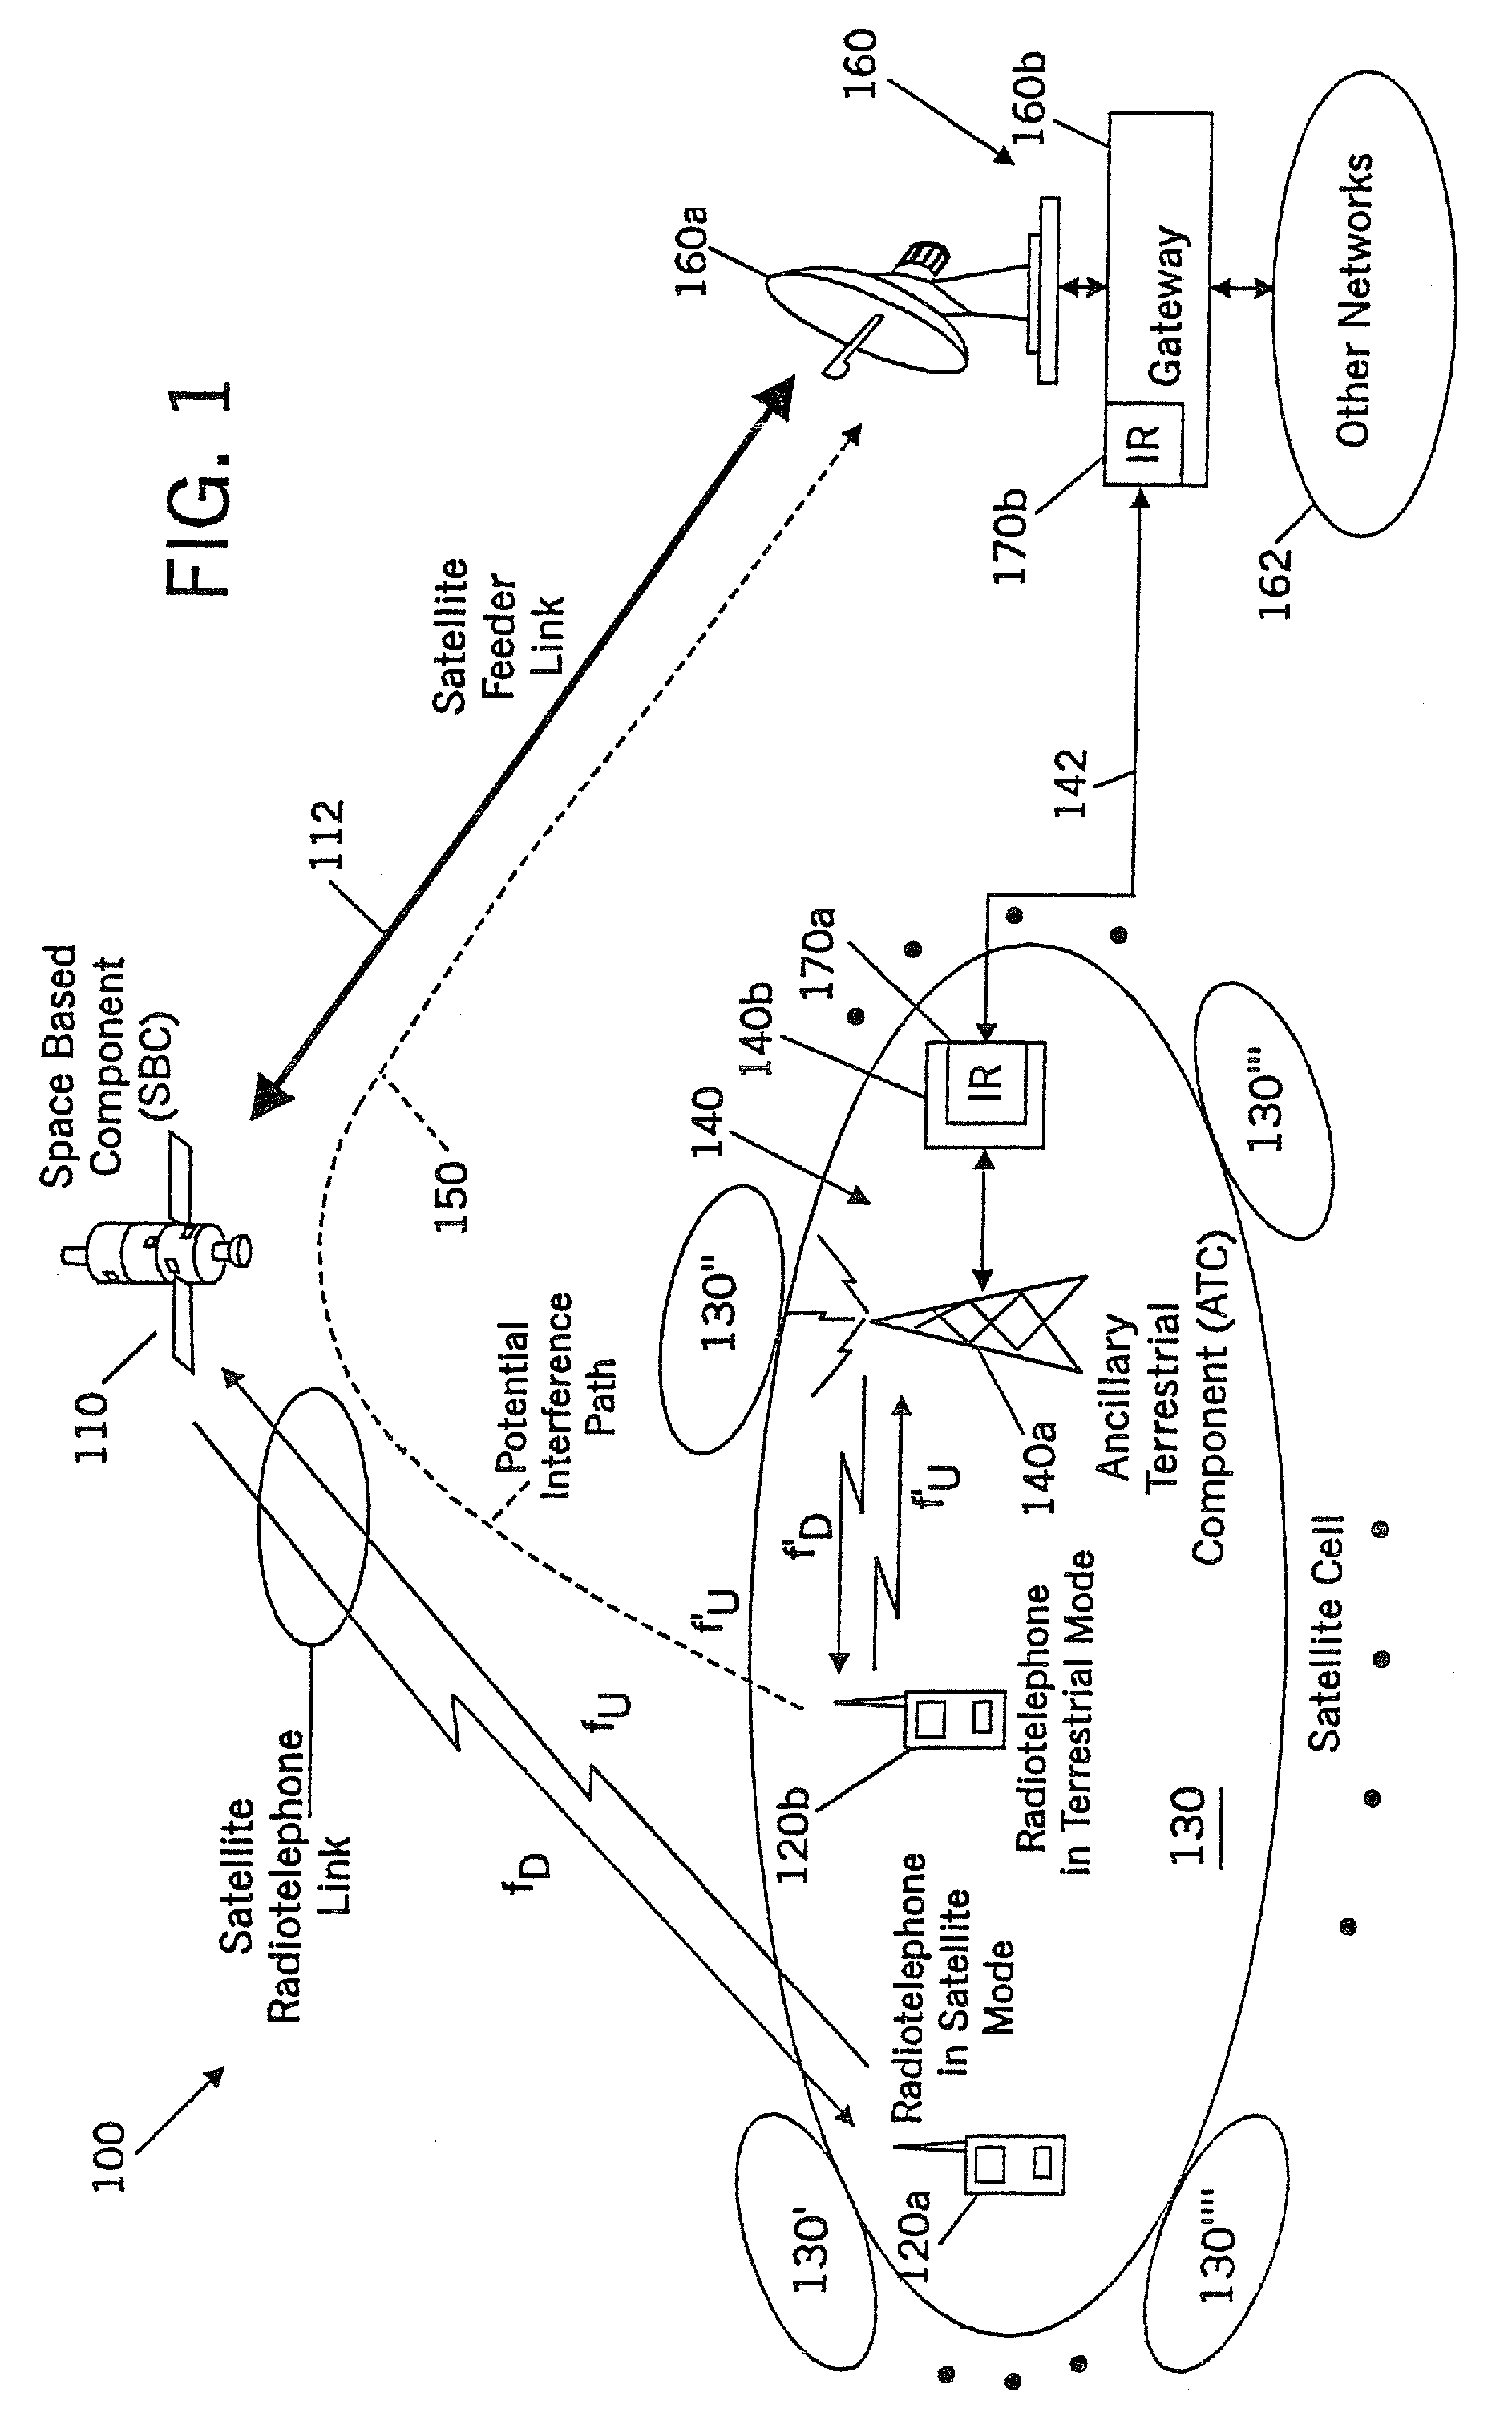 Network-assisted global positioning systems, methods and terminals including doppler shift and code phase estimates